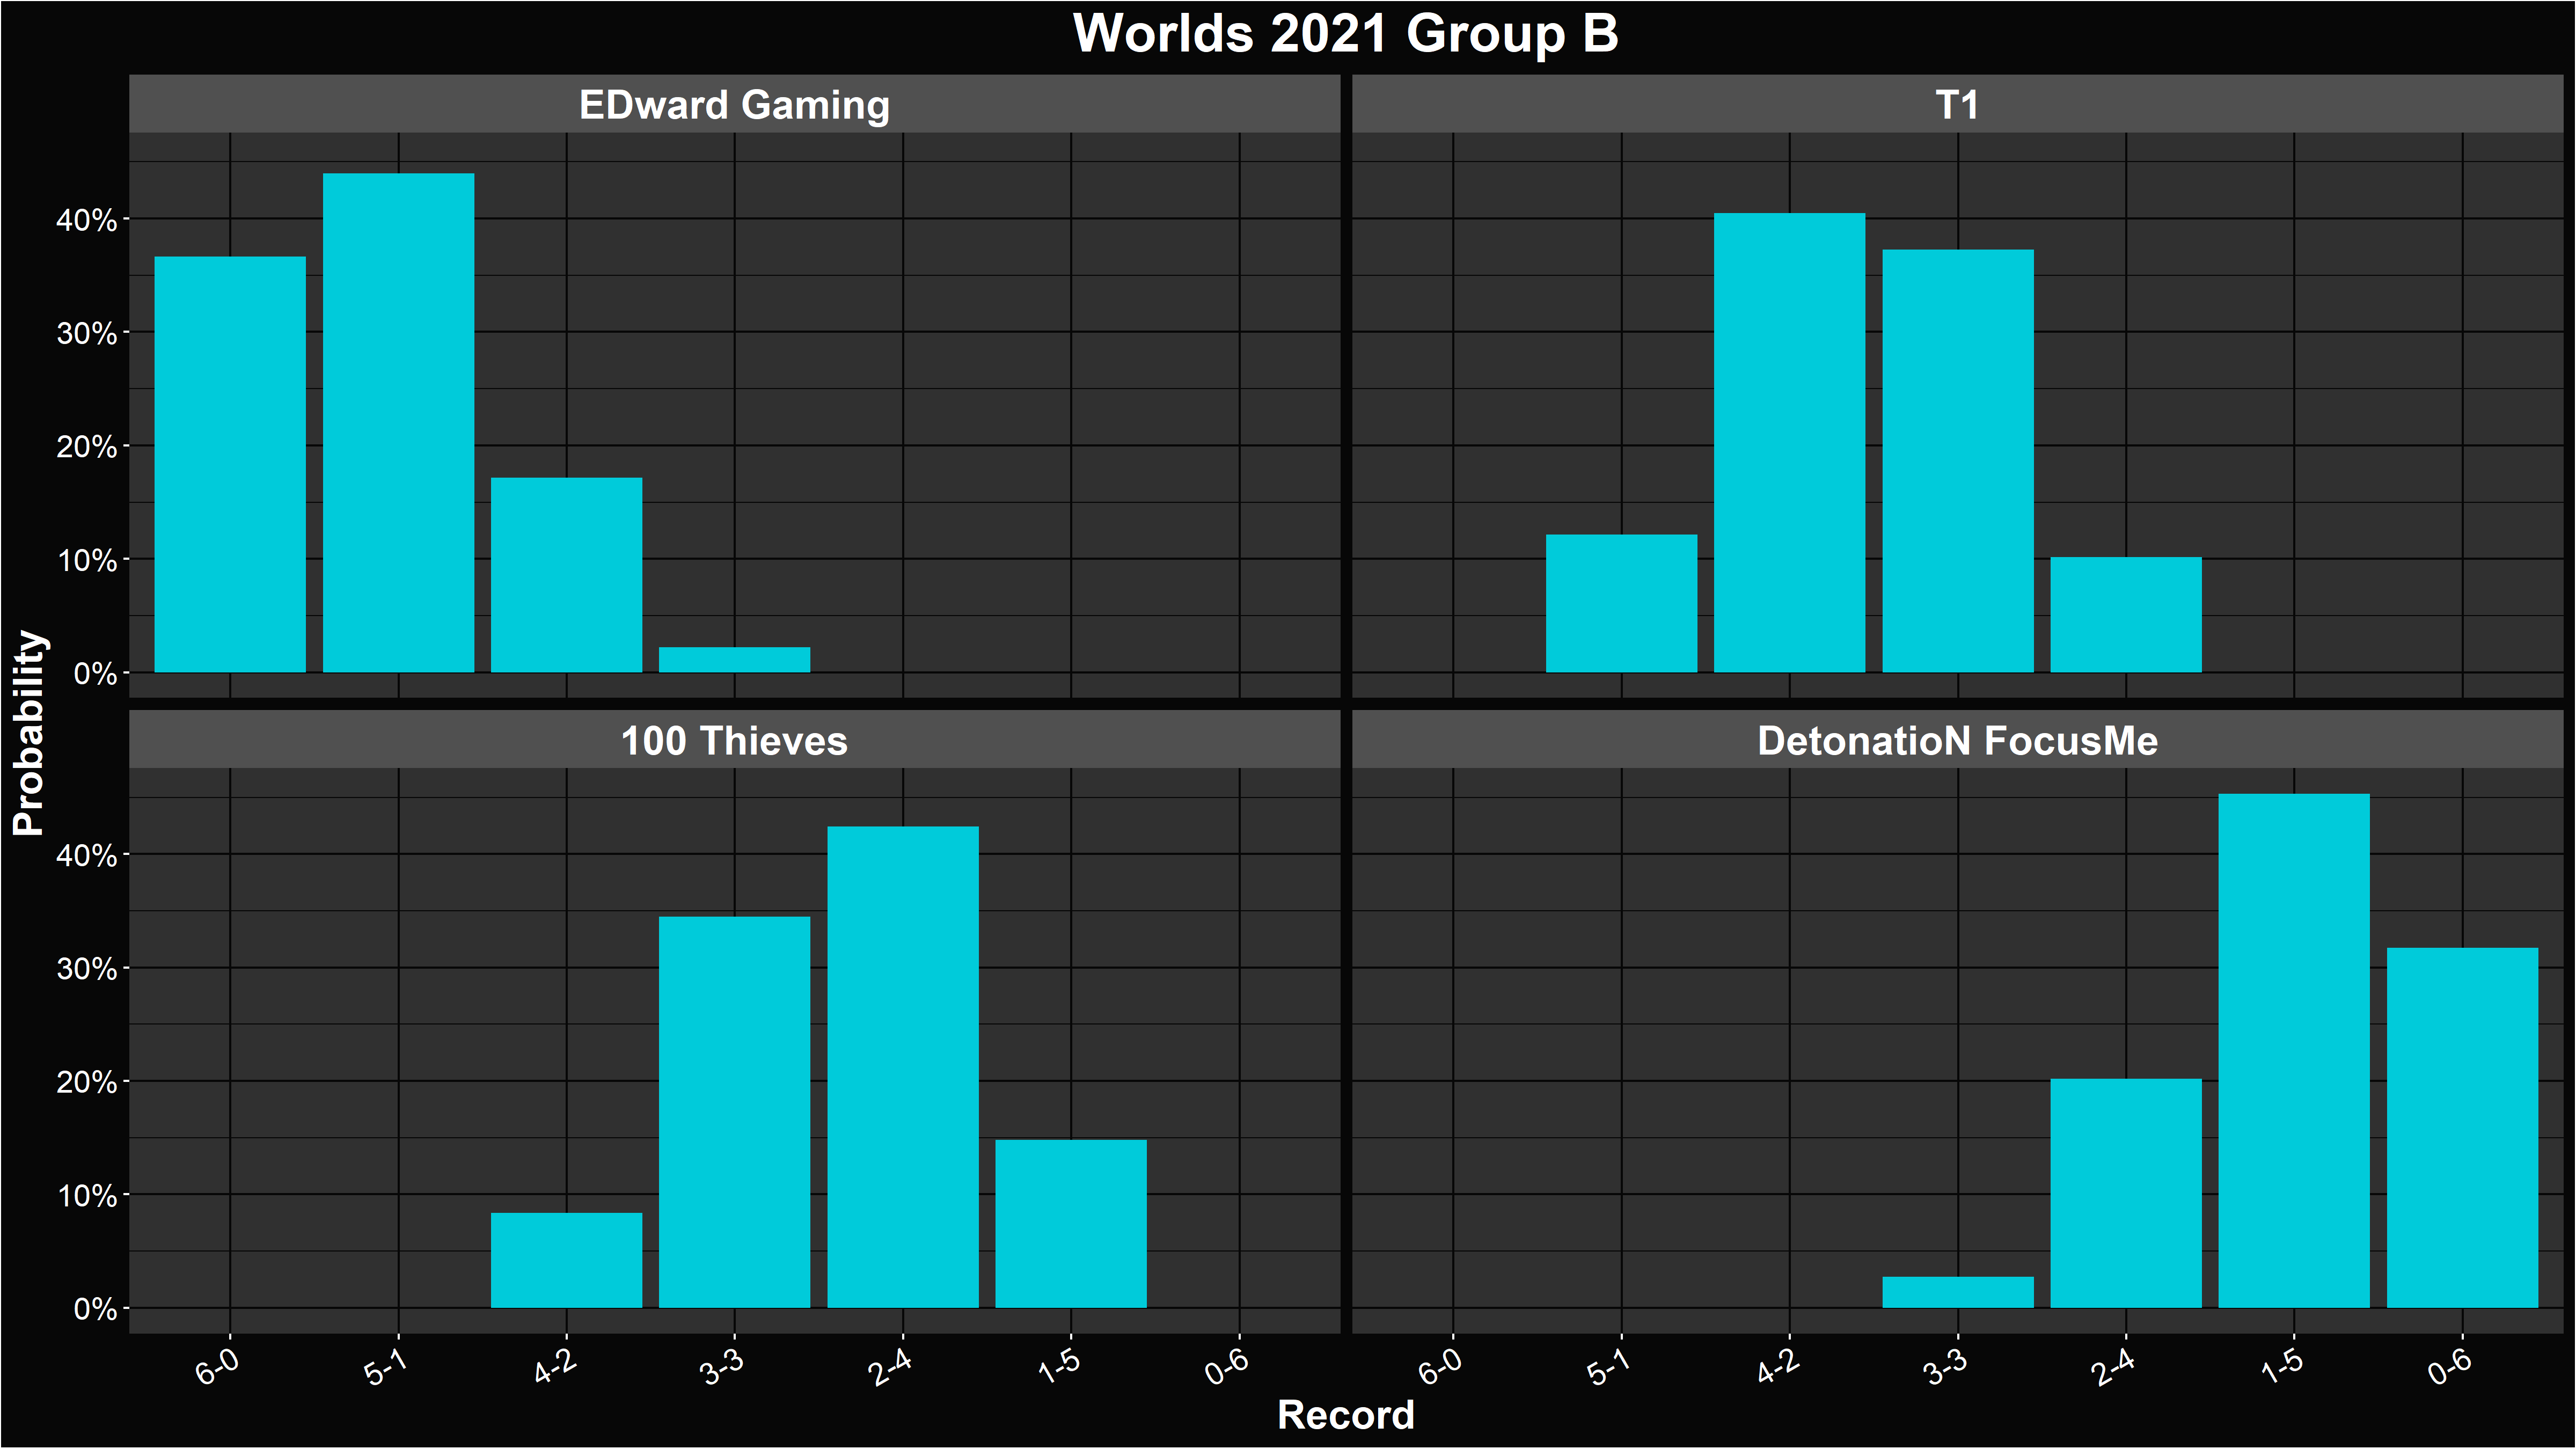 Alacrity's LoL Worlds 2021 Group B Record Distributions